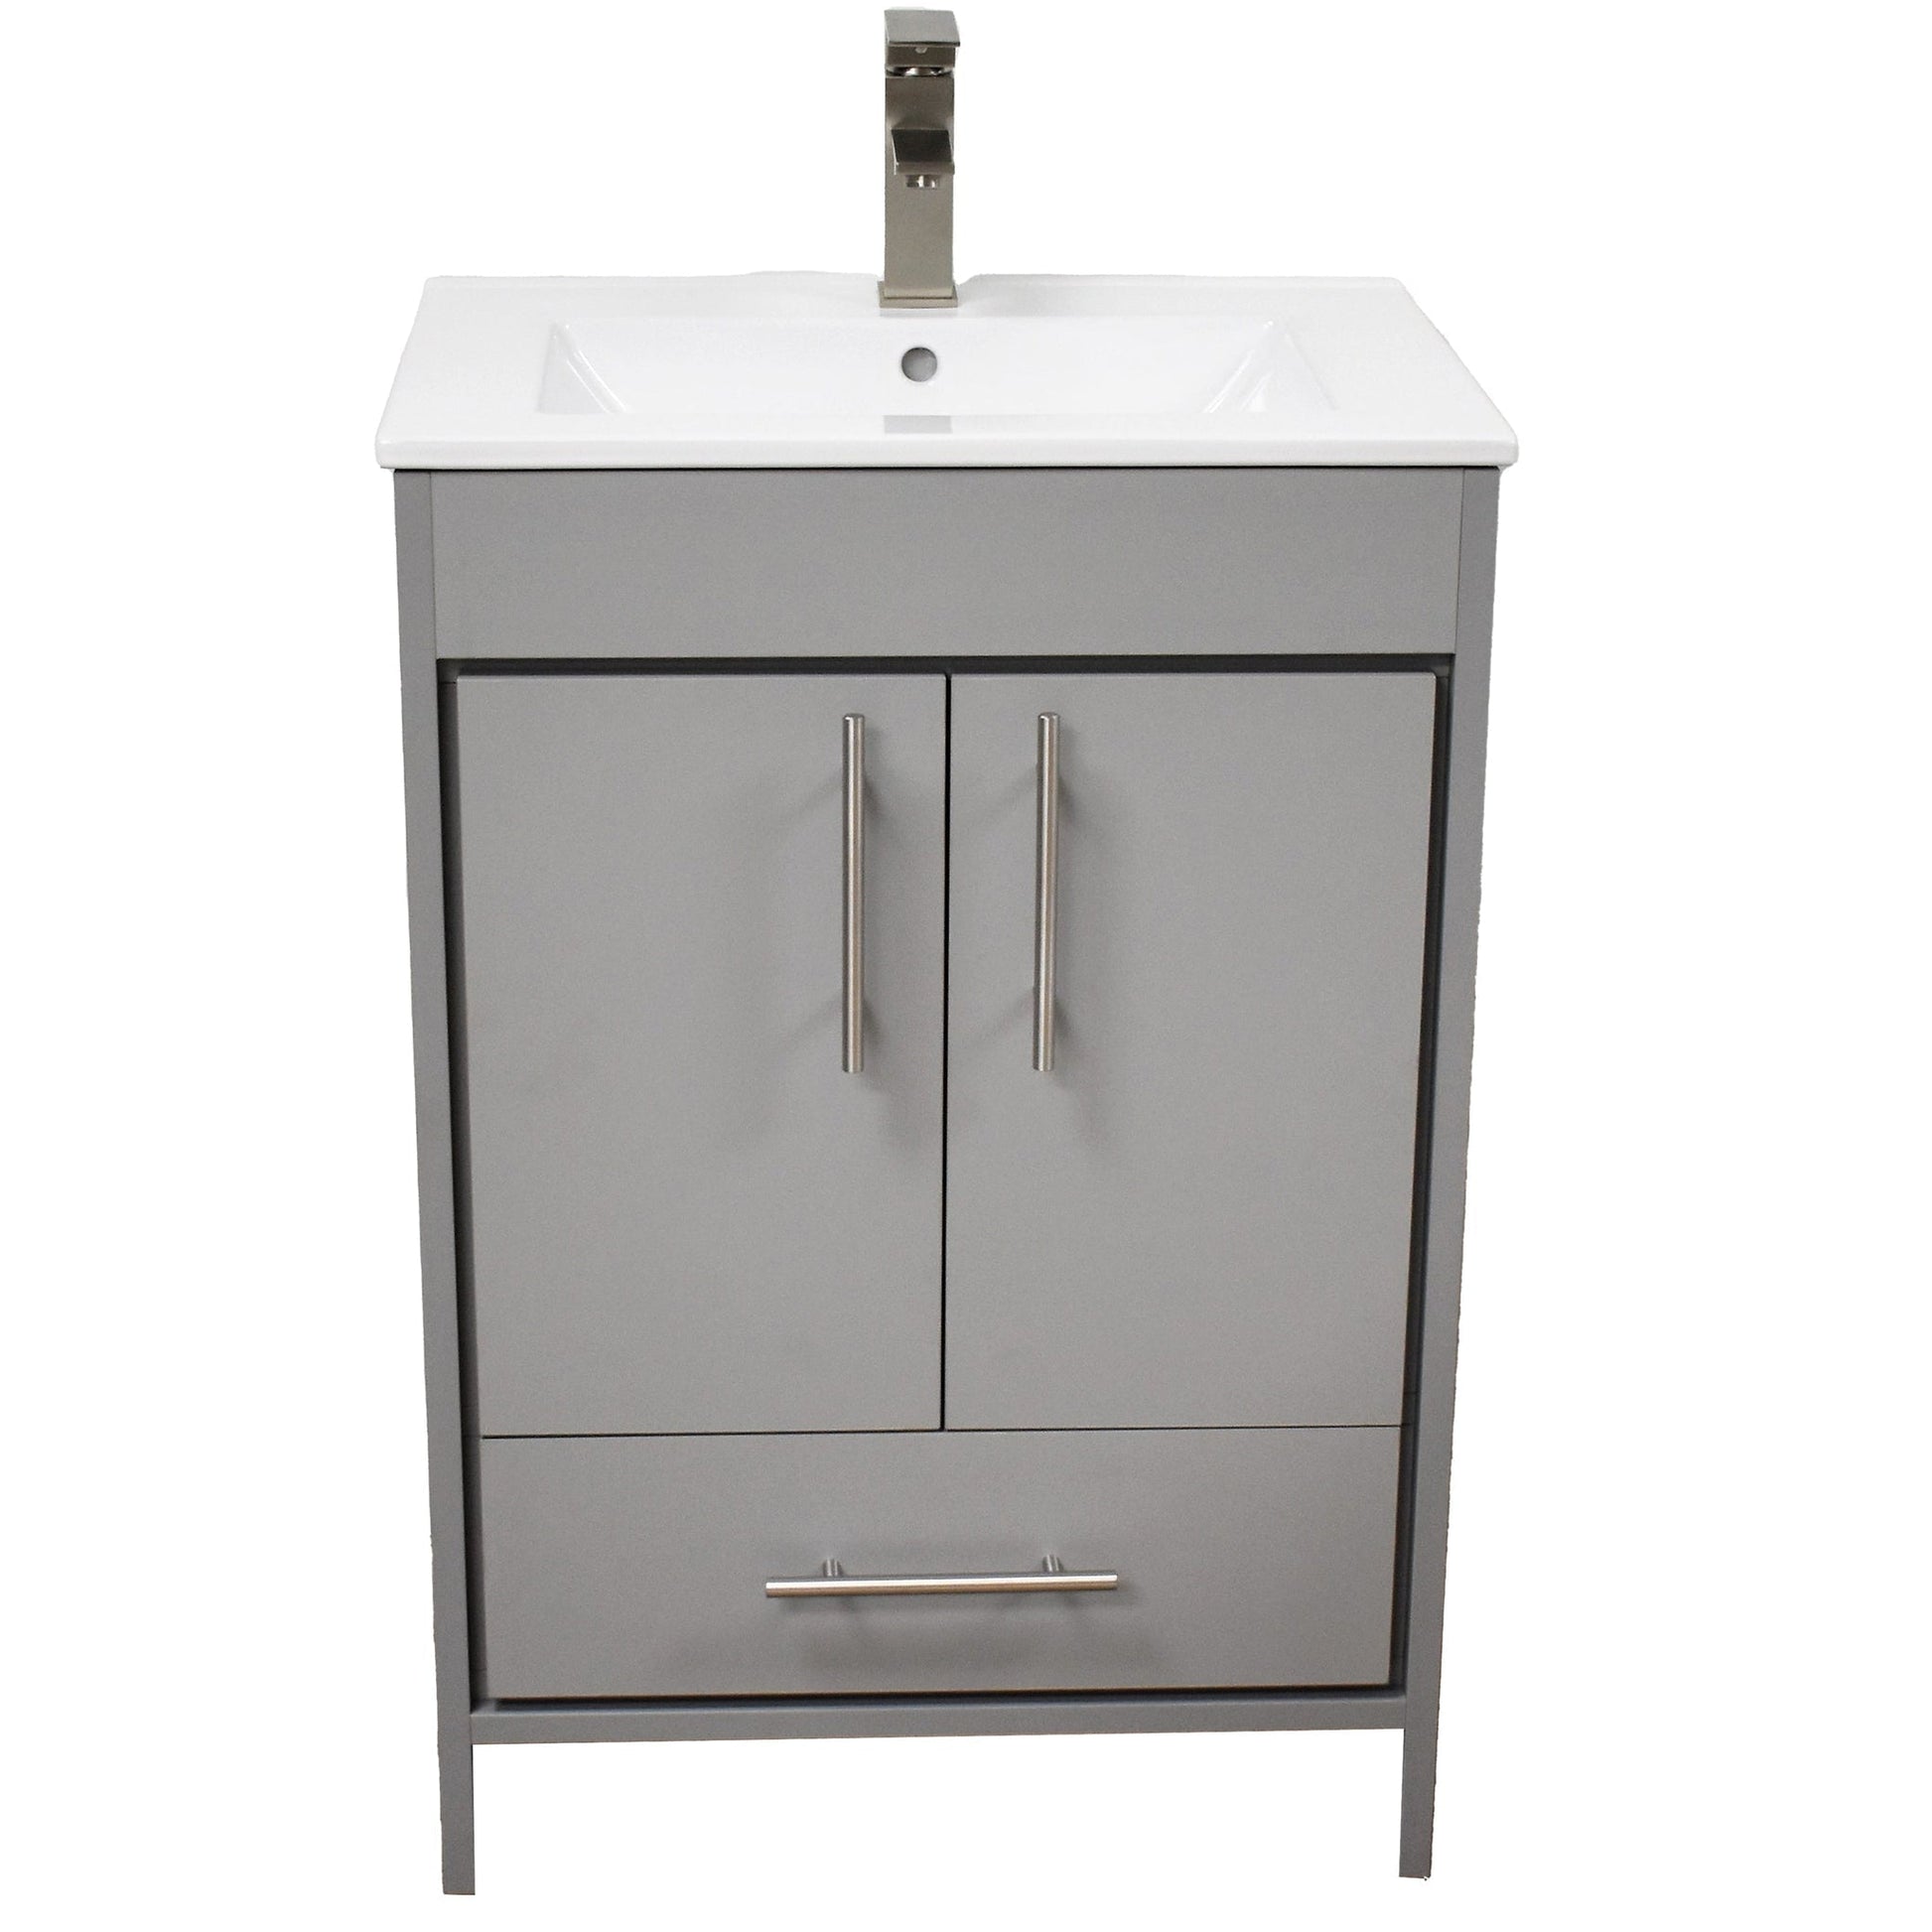 Volpa USA Pacific 30" Gray Freestanding Modern Bathroom Vanity With Integrated Ceramic Top and Brushed Nickel Round Handles